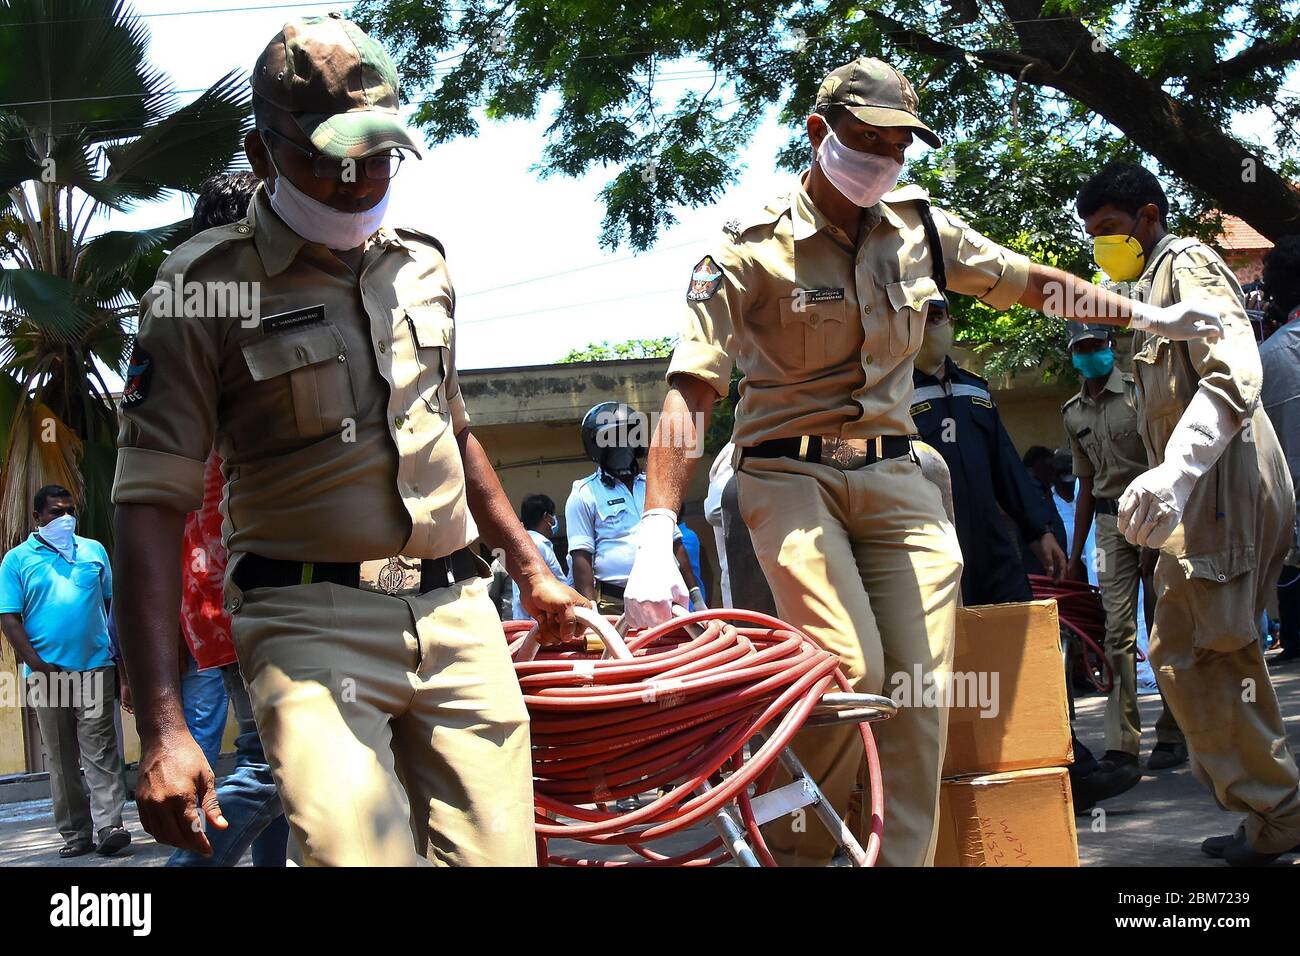 Andhra Pradesh, India. 7th May, 2020. Police personnel carry oxygen pipes after a gas leakage at the 'LG Polymers' chemical plant in the Vishakhapatnam district of Andhra Pradesh, India, May 7, 2020. The death toll in Thursday's gas leak incident in India's southern state Andhra Pradesh has risen to 11, confirmed Director General of the National Disaster Response Force (NDRF) S.N. Pradhan while addressing media persons in Delhi. Credit: Str/Xinhua/Alamy Live News Stock Photo